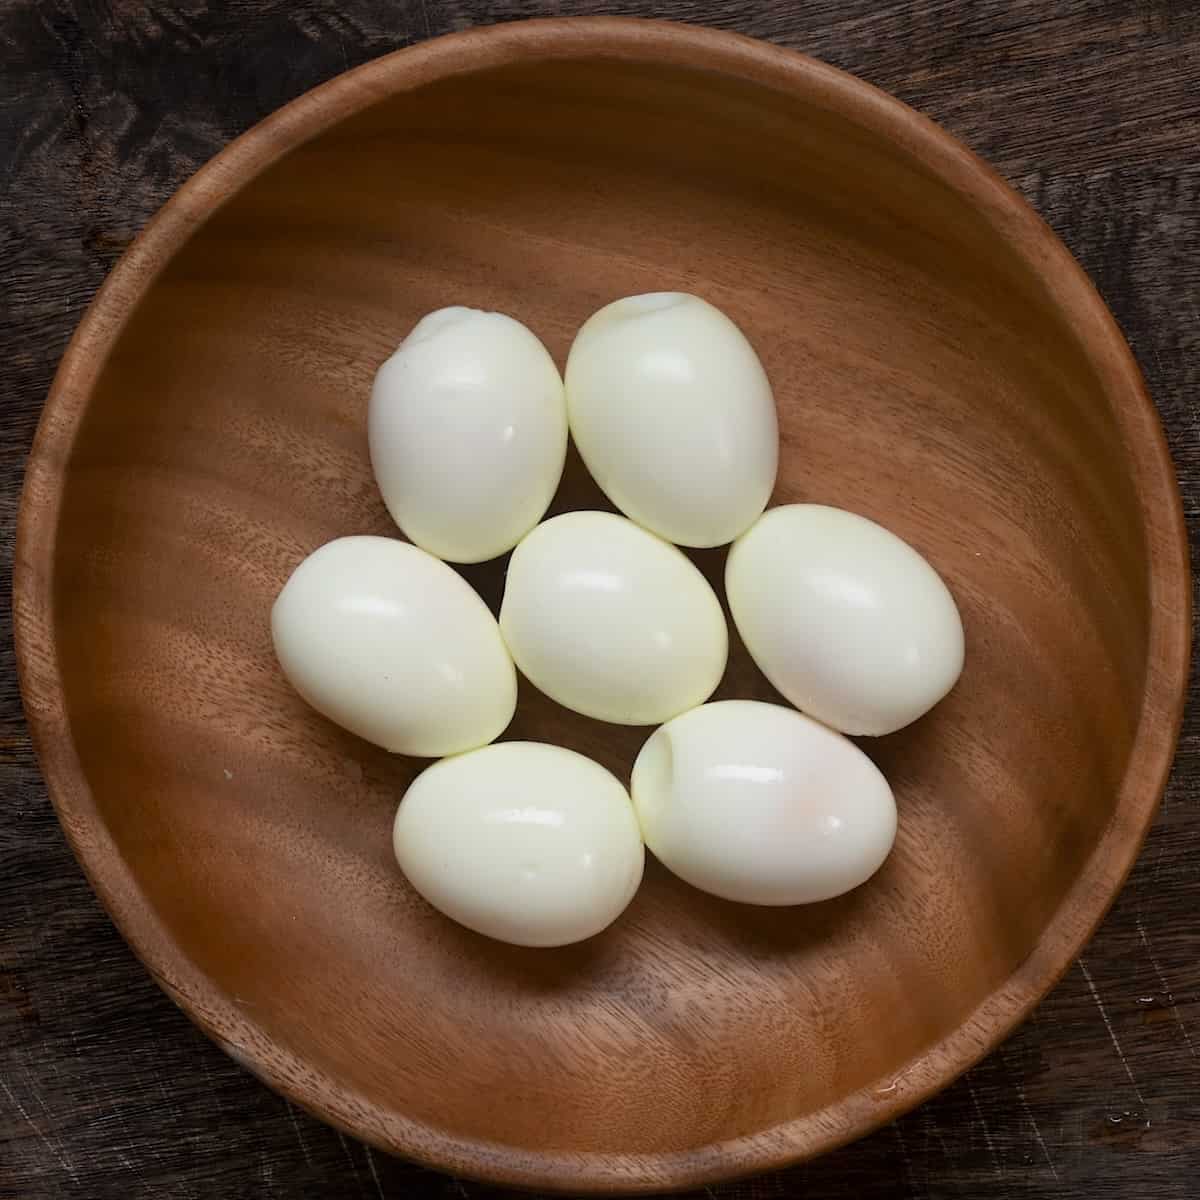 Seven peeled boiled eggs in a bowl